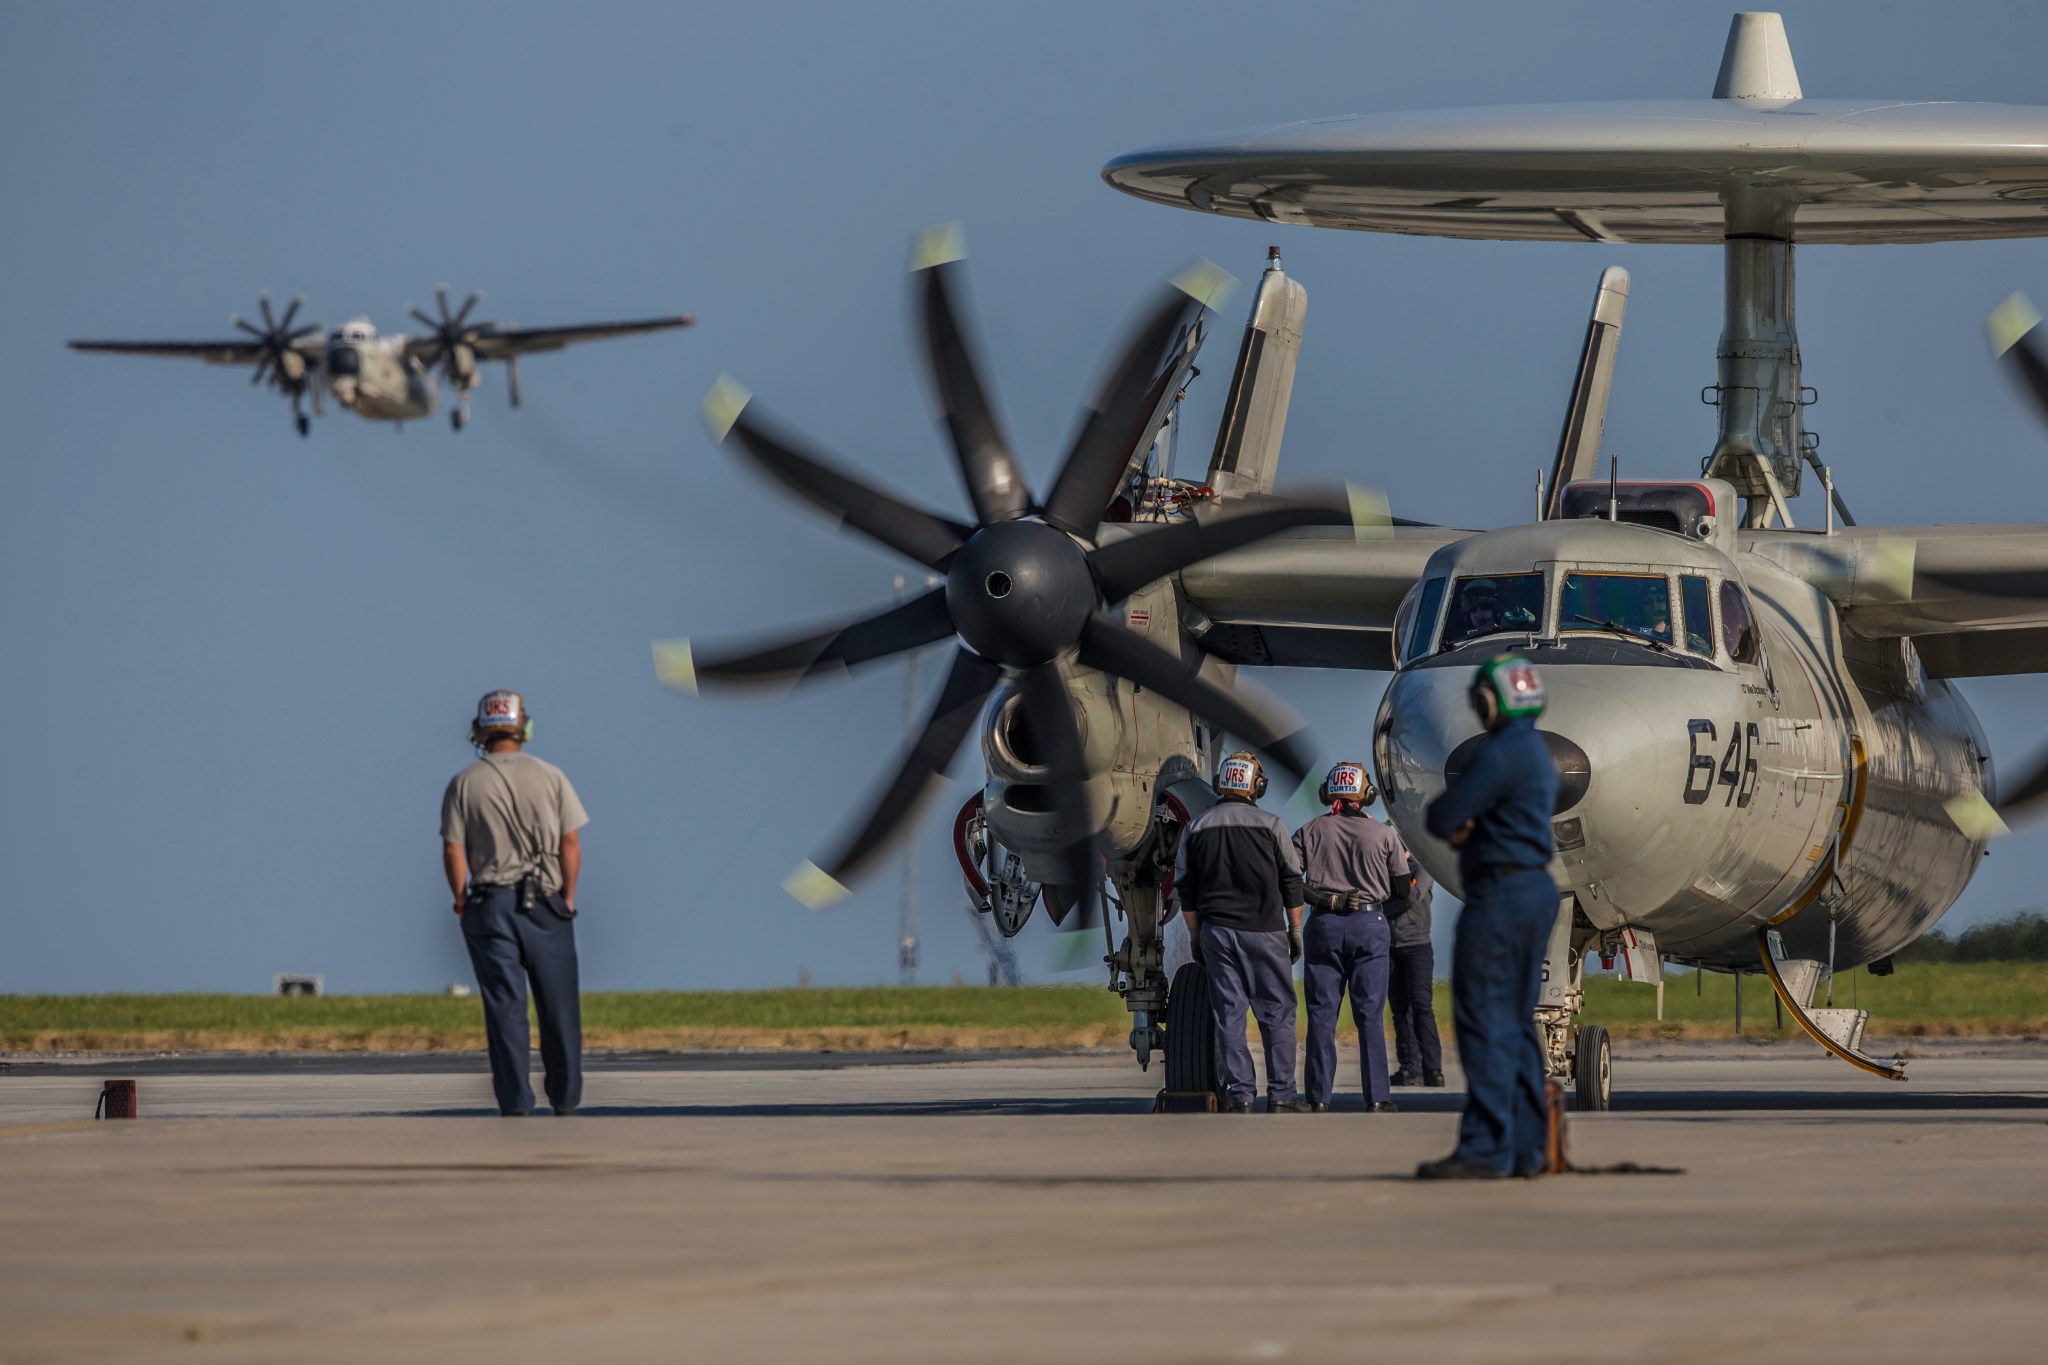 A military aircraft on a tarmac with multiple crew members around. A second military plane is seen in the distance flying in the sky.